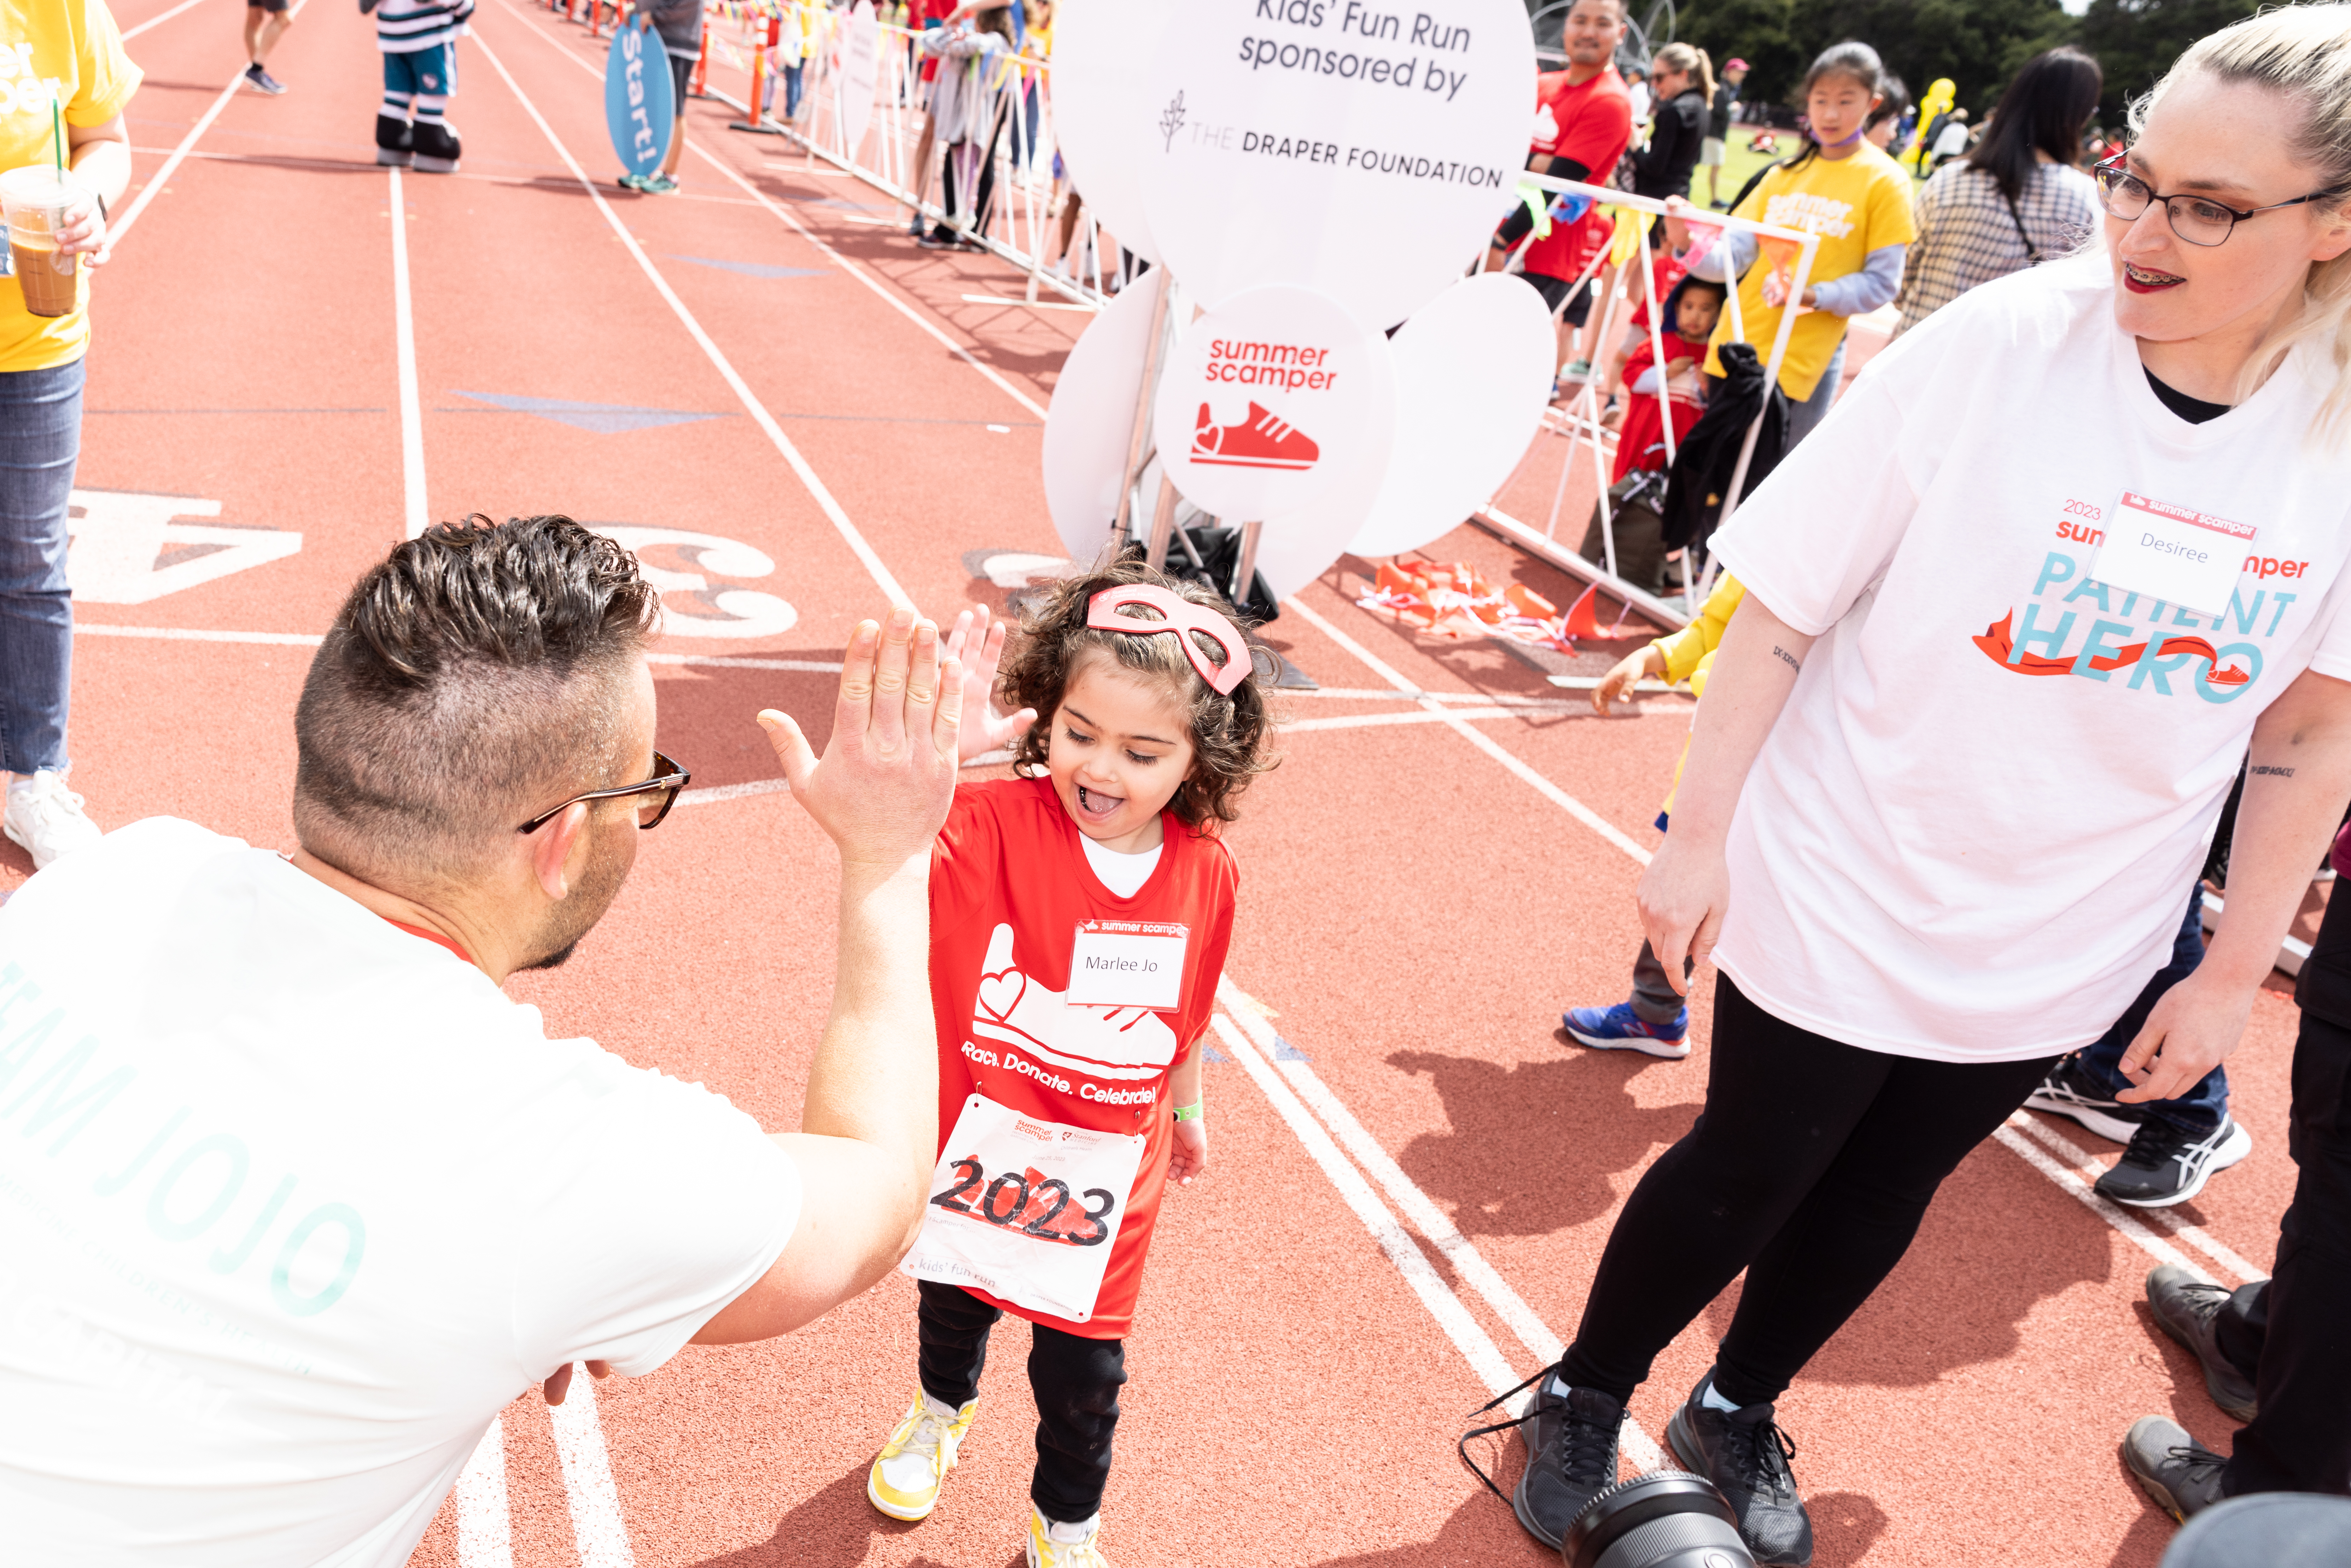 Young girl giving a high-five to a man at the end of the kids' fun run.